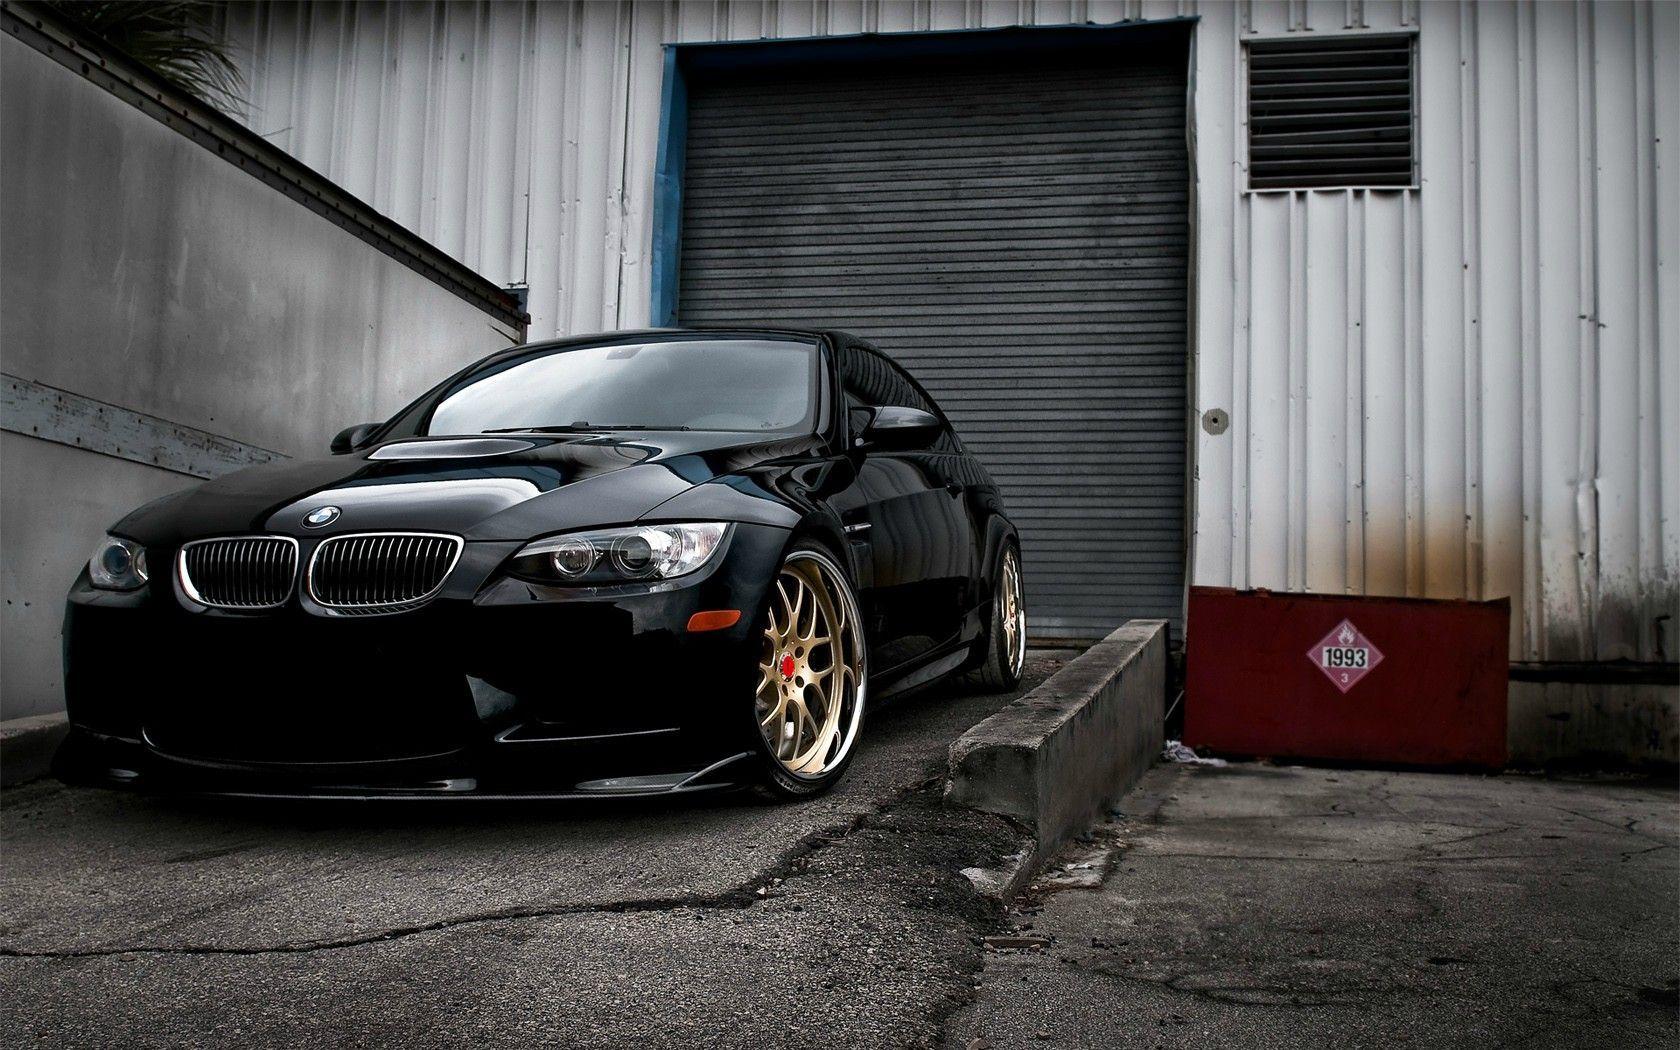 Black Bmw M3 Wallpapers Top Free Black Bmw M3 Backgrounds Wallpaperaccess